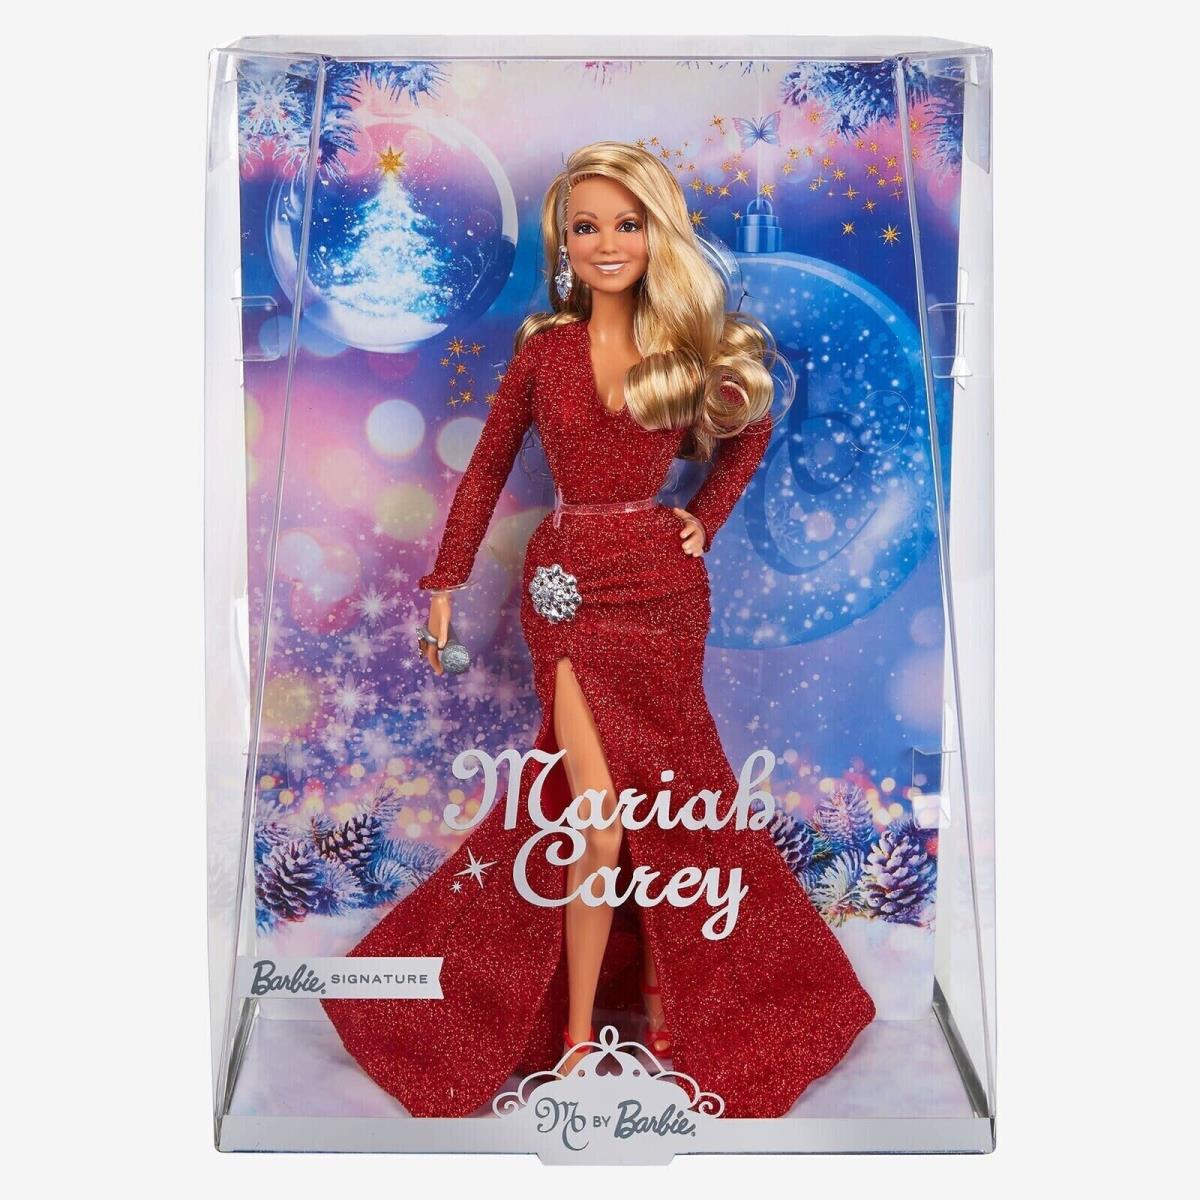 Mariah Carey Barbie Holiday Signature Christmas Doll Red Dress - Ships Same Day